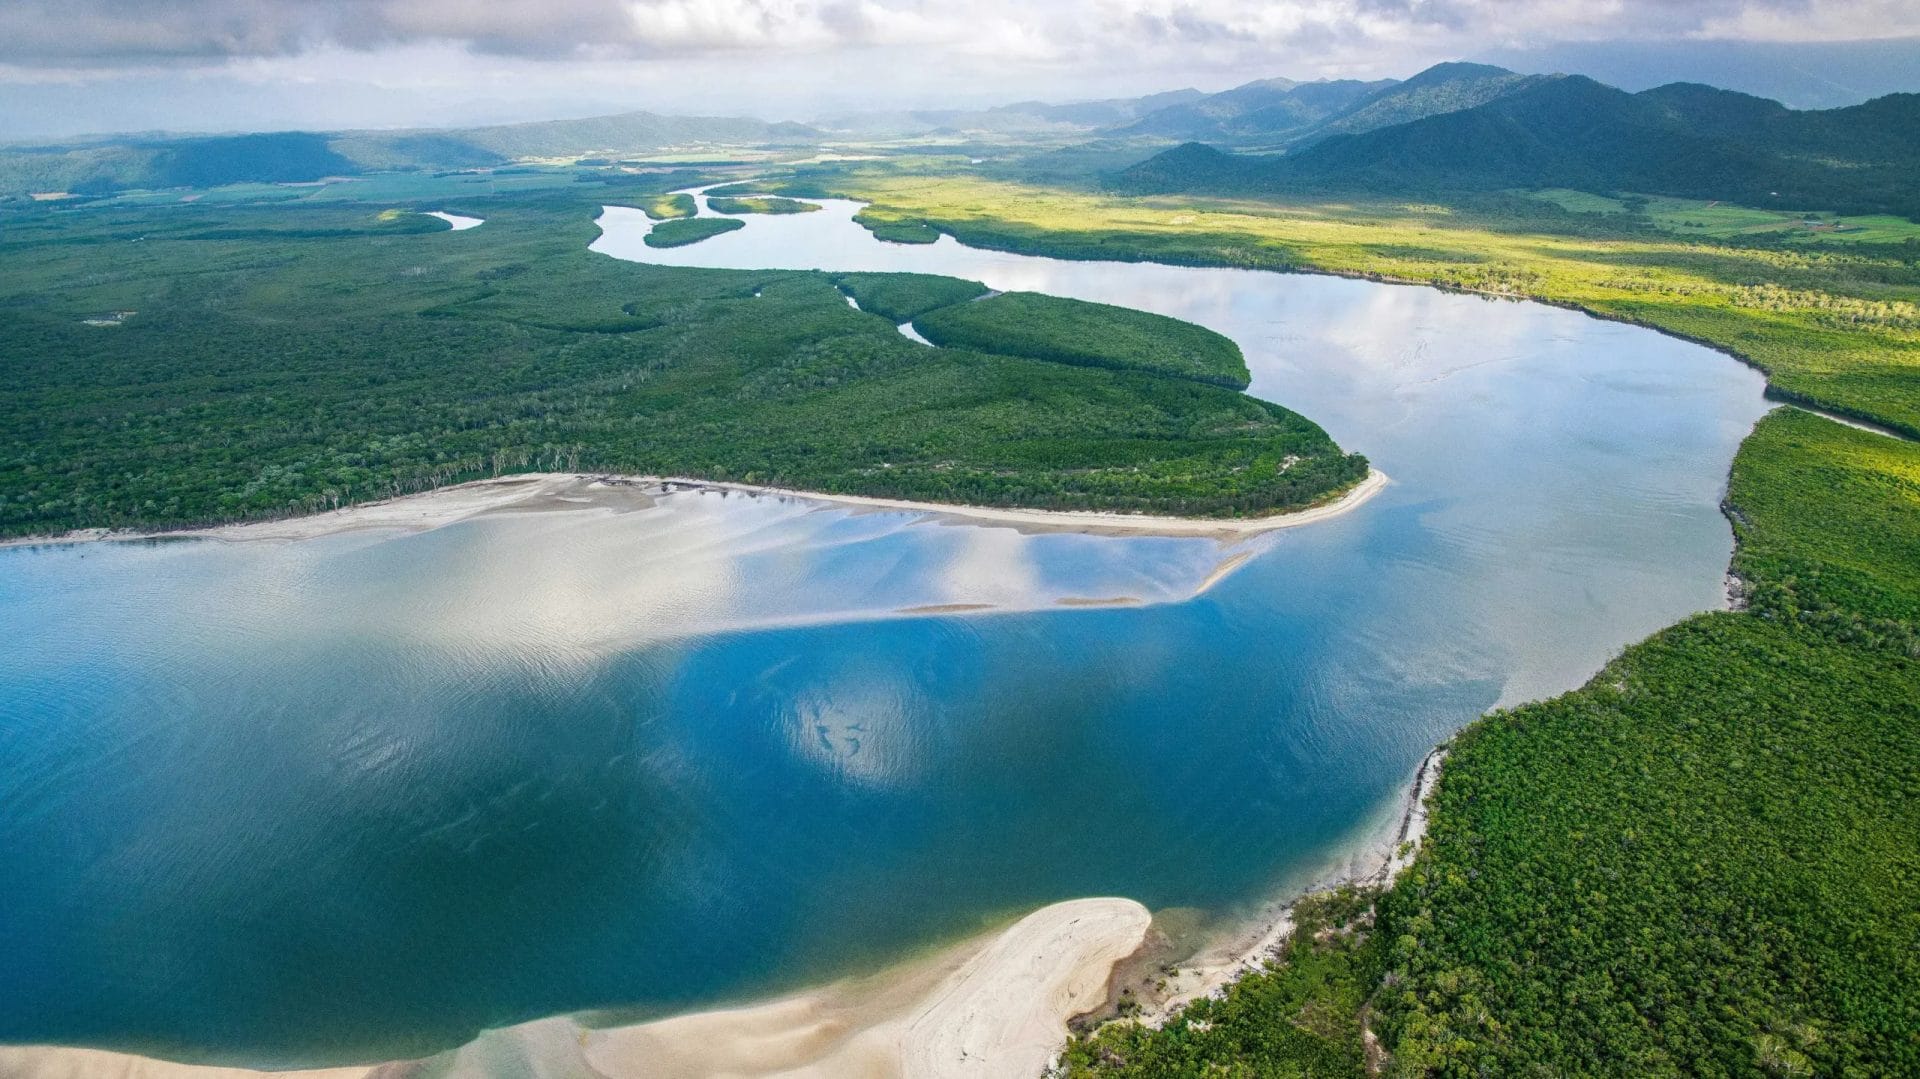 Aerial view of the Daintree River in Tropical North Queensland